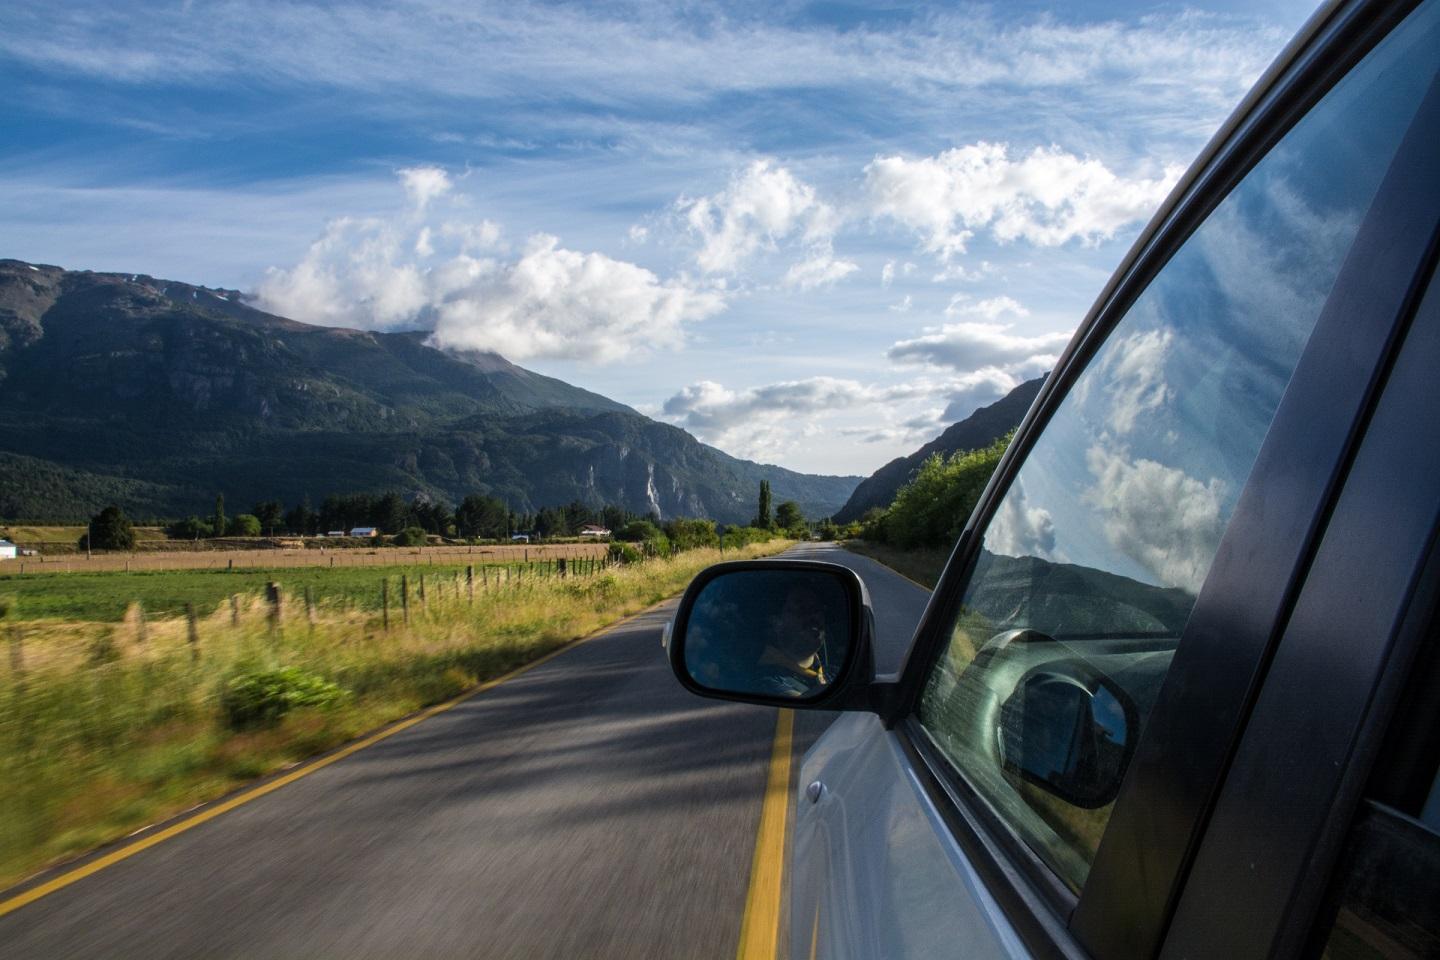 car_driving_down_a_road_with_moountains_in_the_background